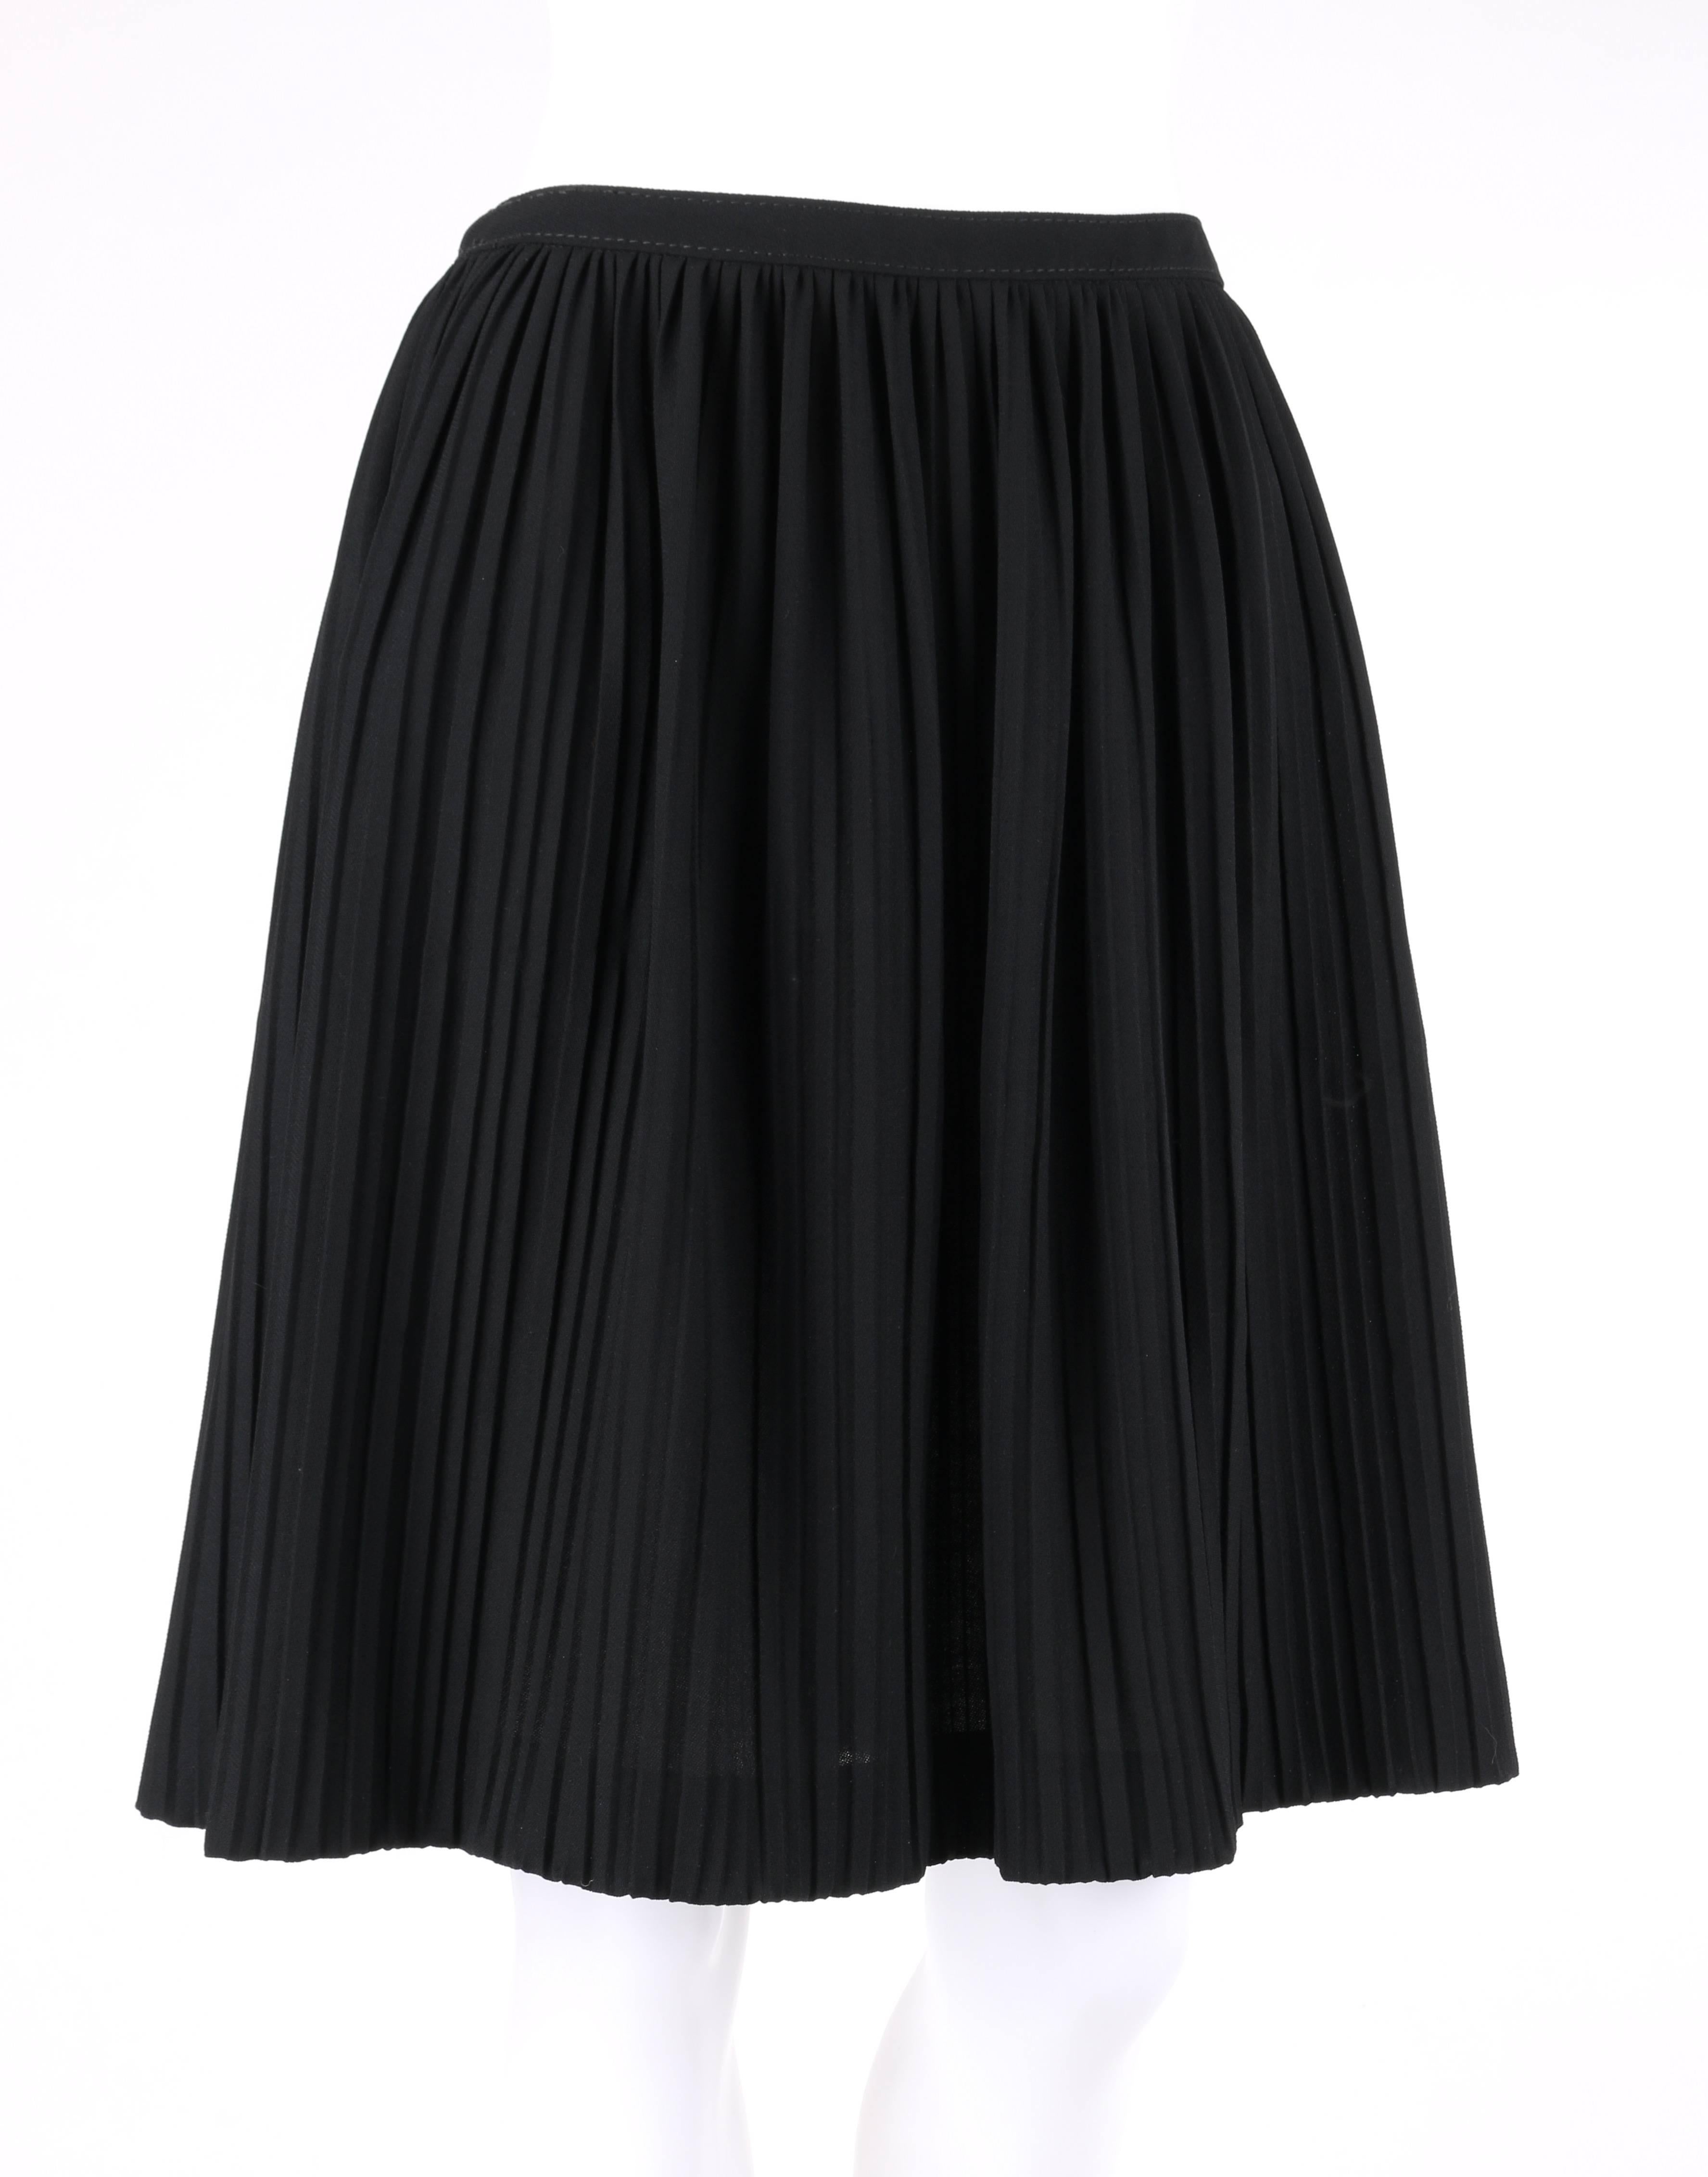 Valentino black wool crepe accordion pleated knee length skirt. Thin banded waist. Center back invisible zipper with hook and eye closure at top. Knee length. Unlined. Marked Fabric Content: 